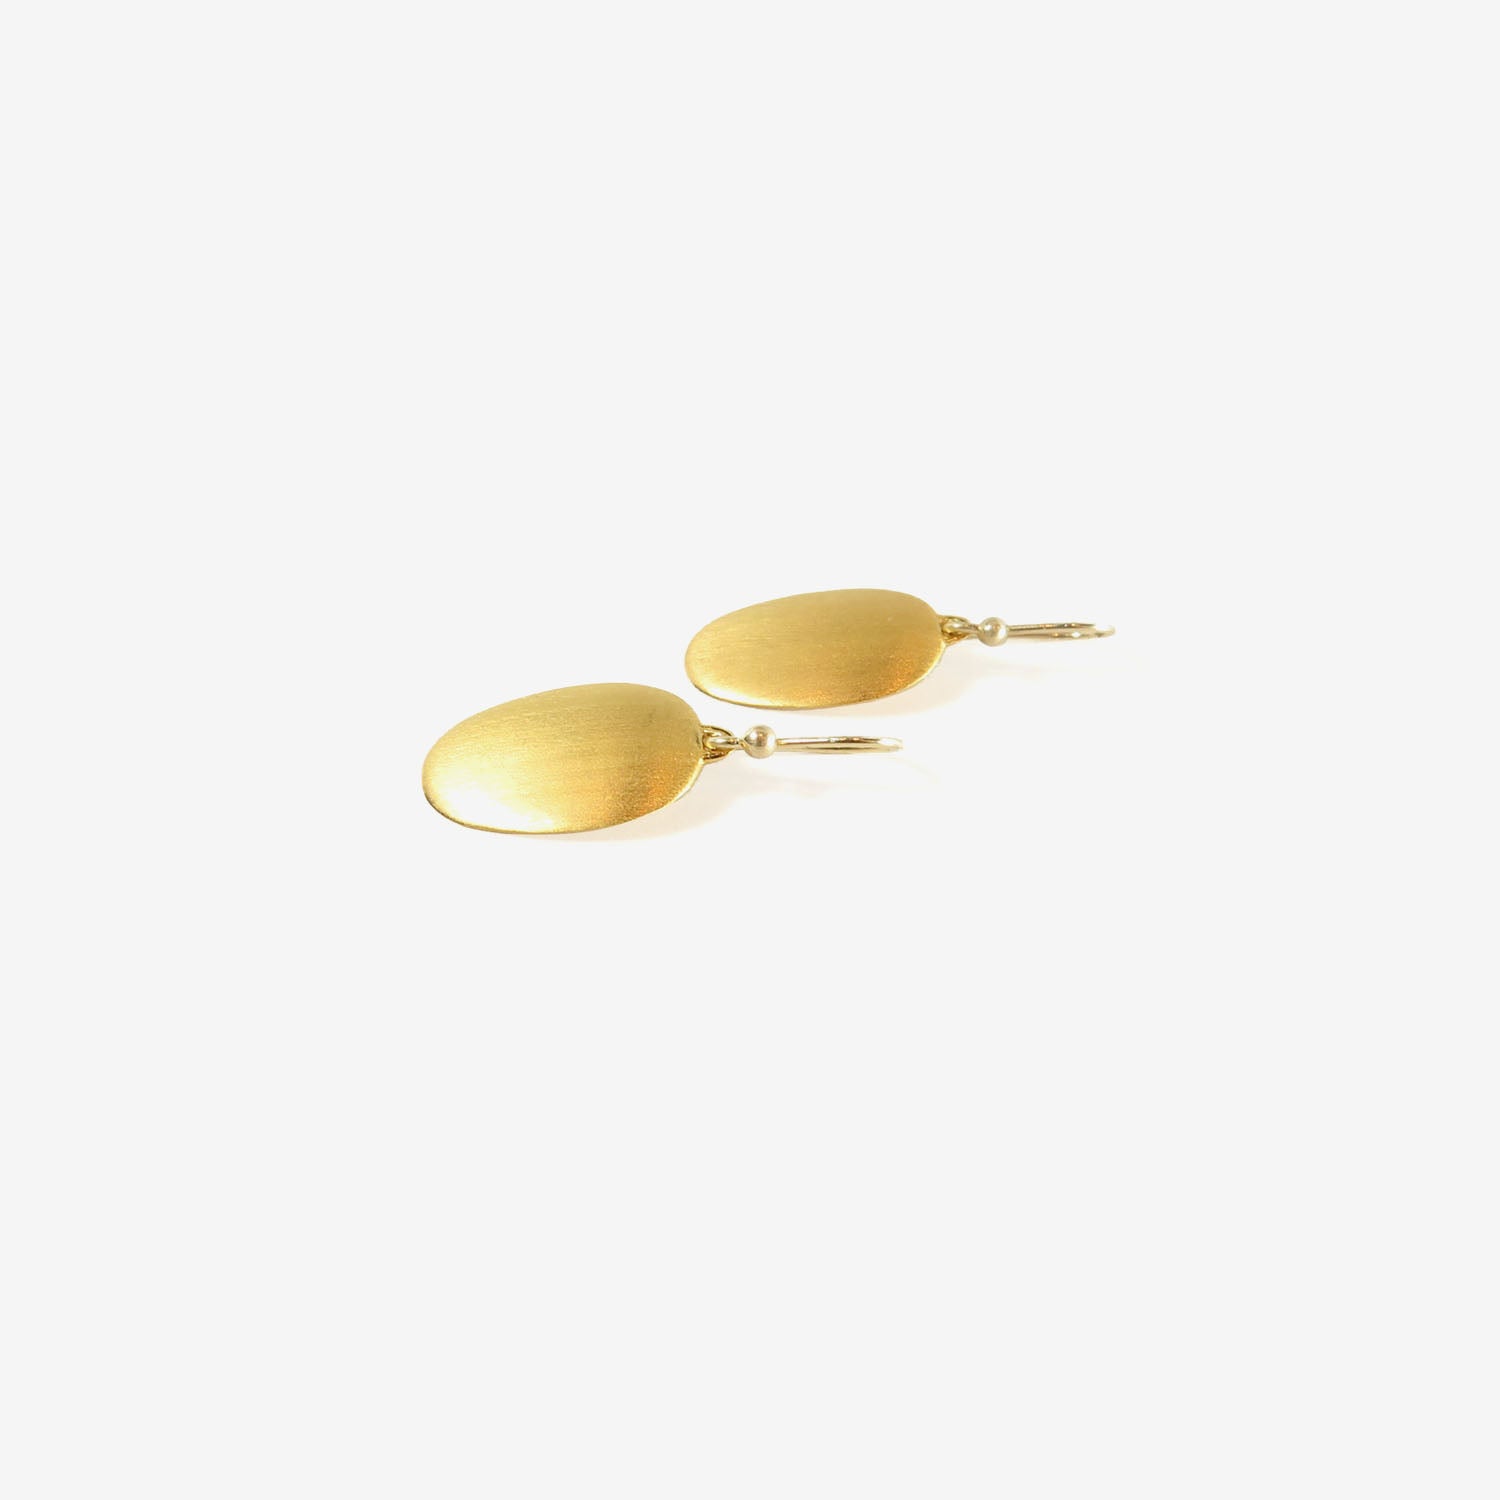 TED MUEHLING 24K YELLOW GOLD PLATED SMALL CHIPS